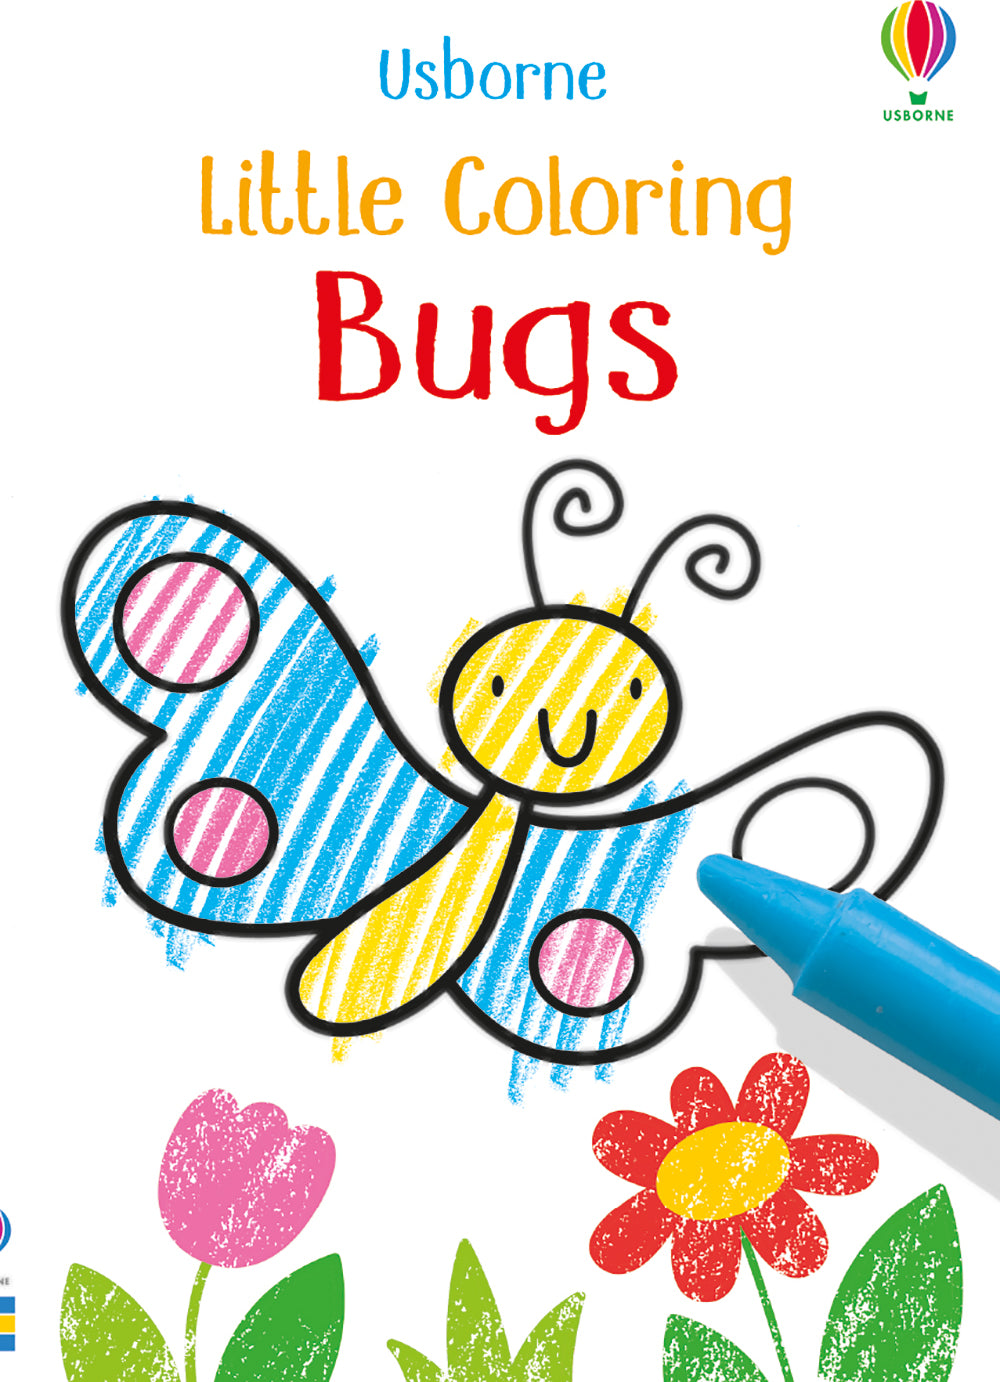 Little Coloring Bugs